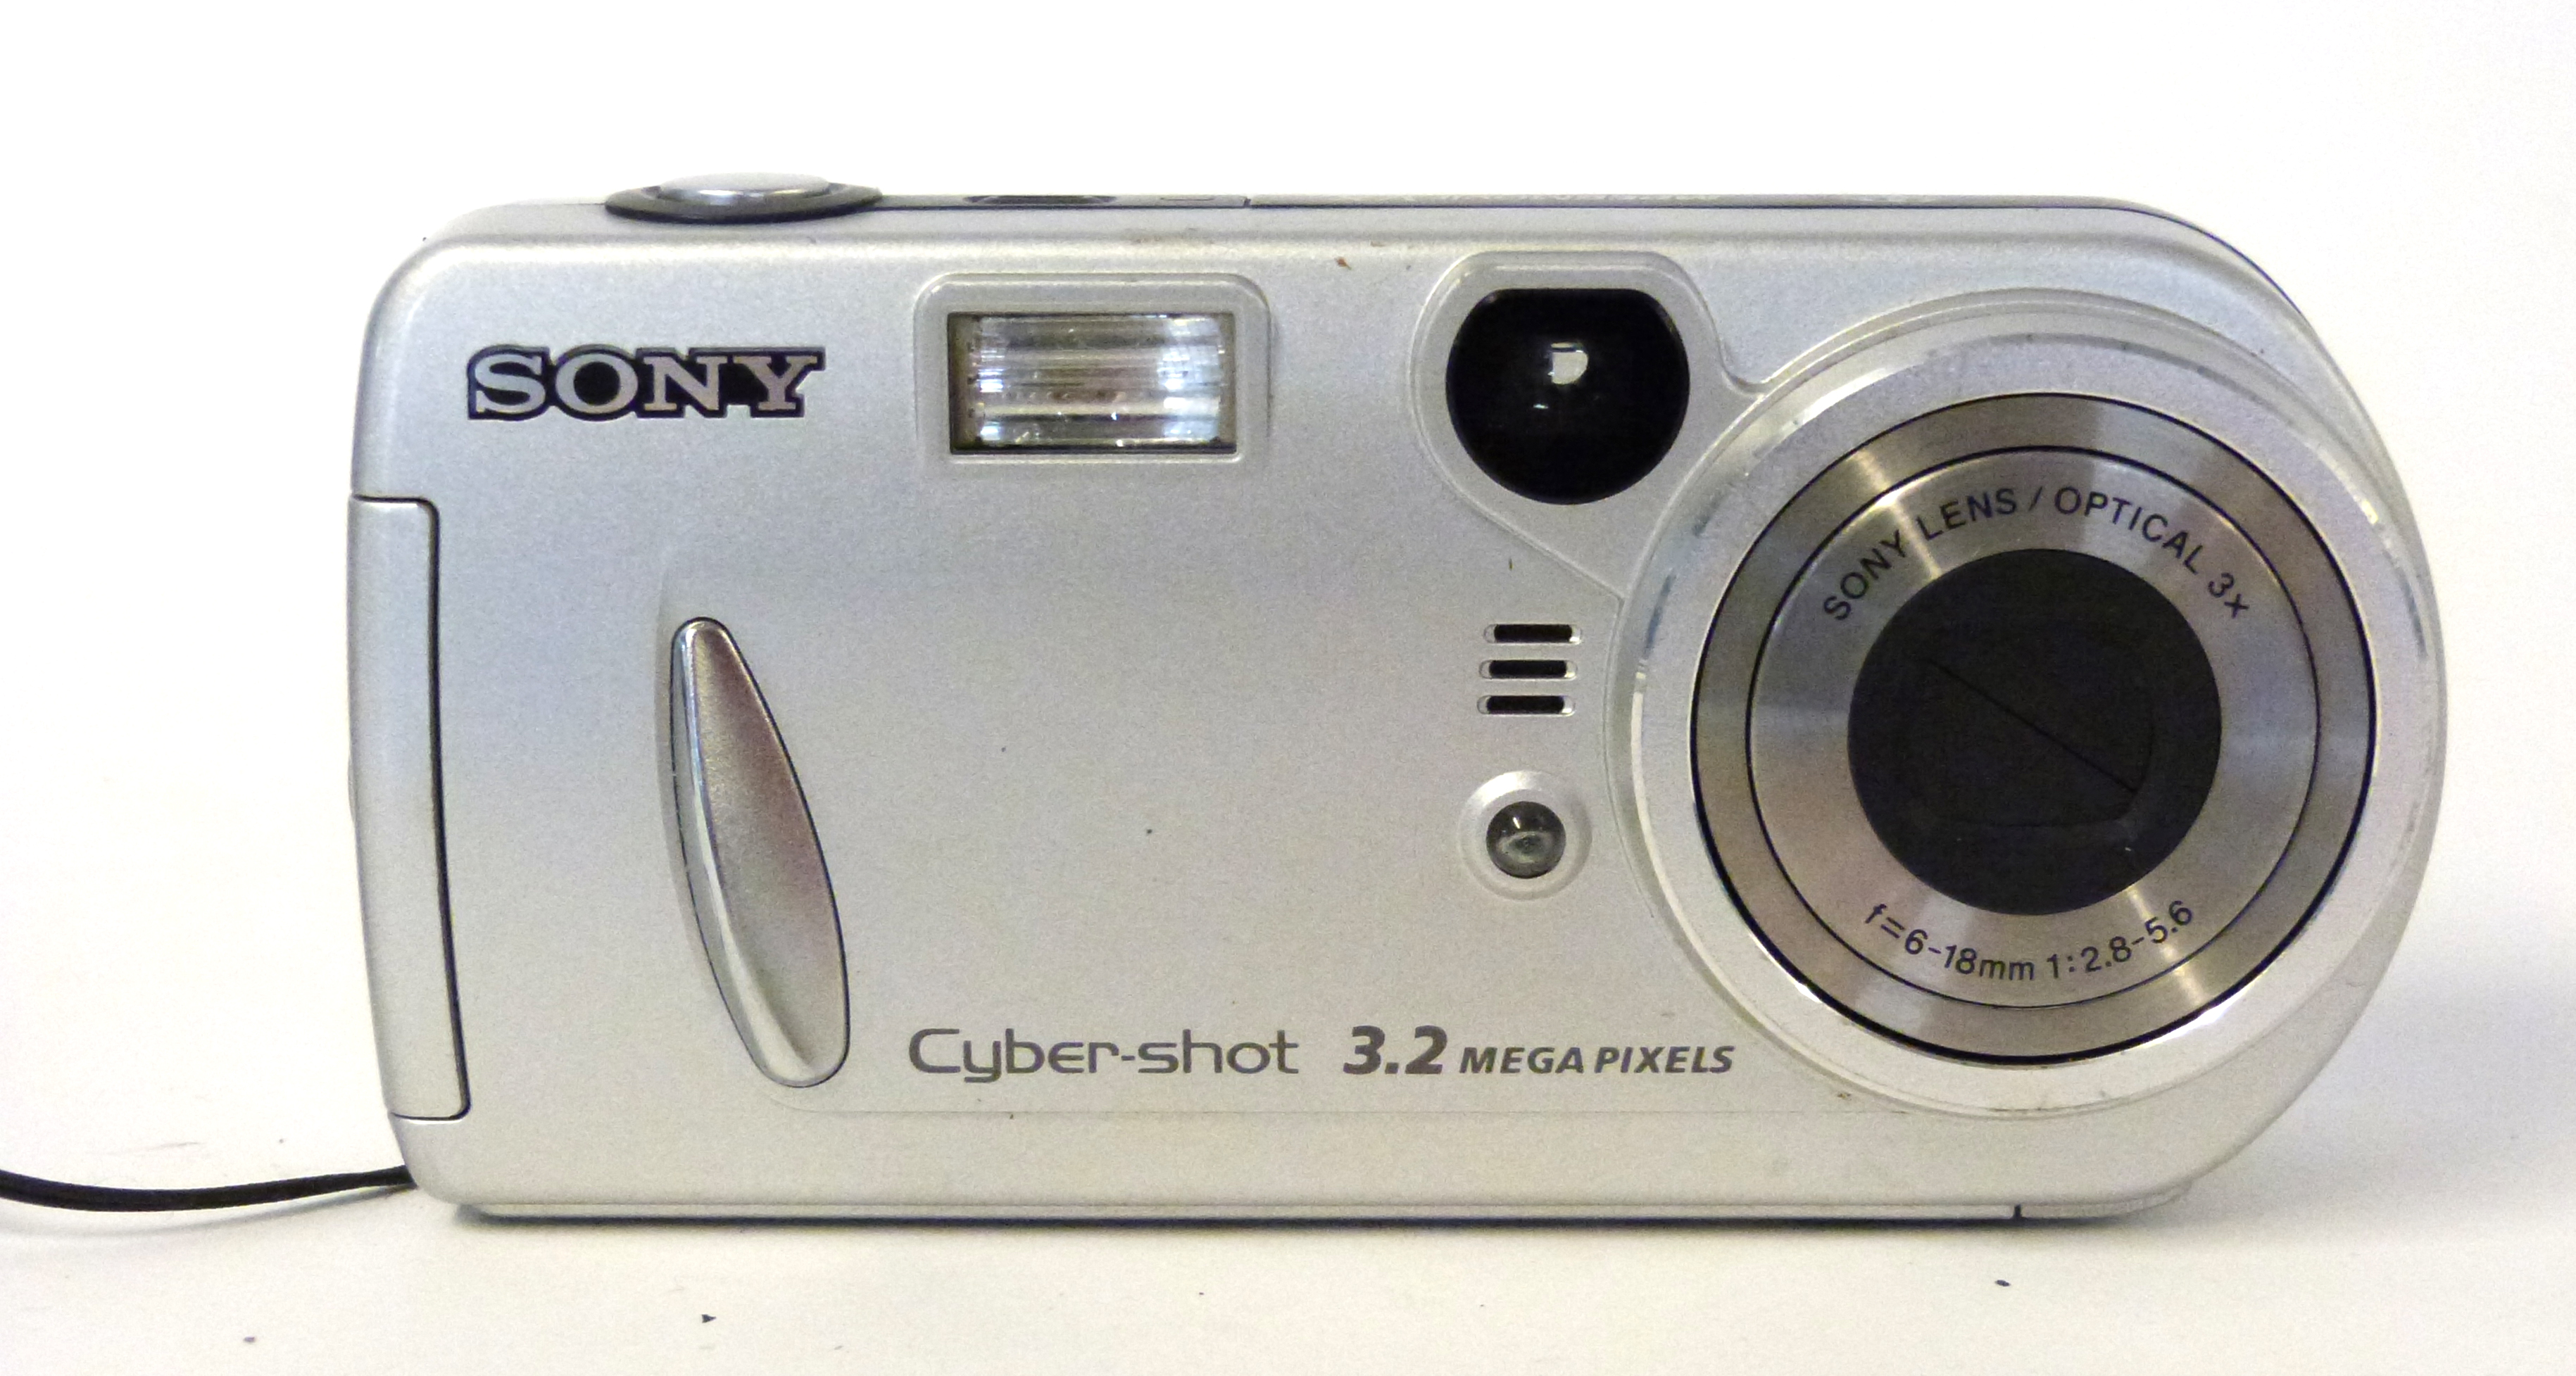 Sony Smart zoom DSC-P72 digital camera with case - Image 2 of 4